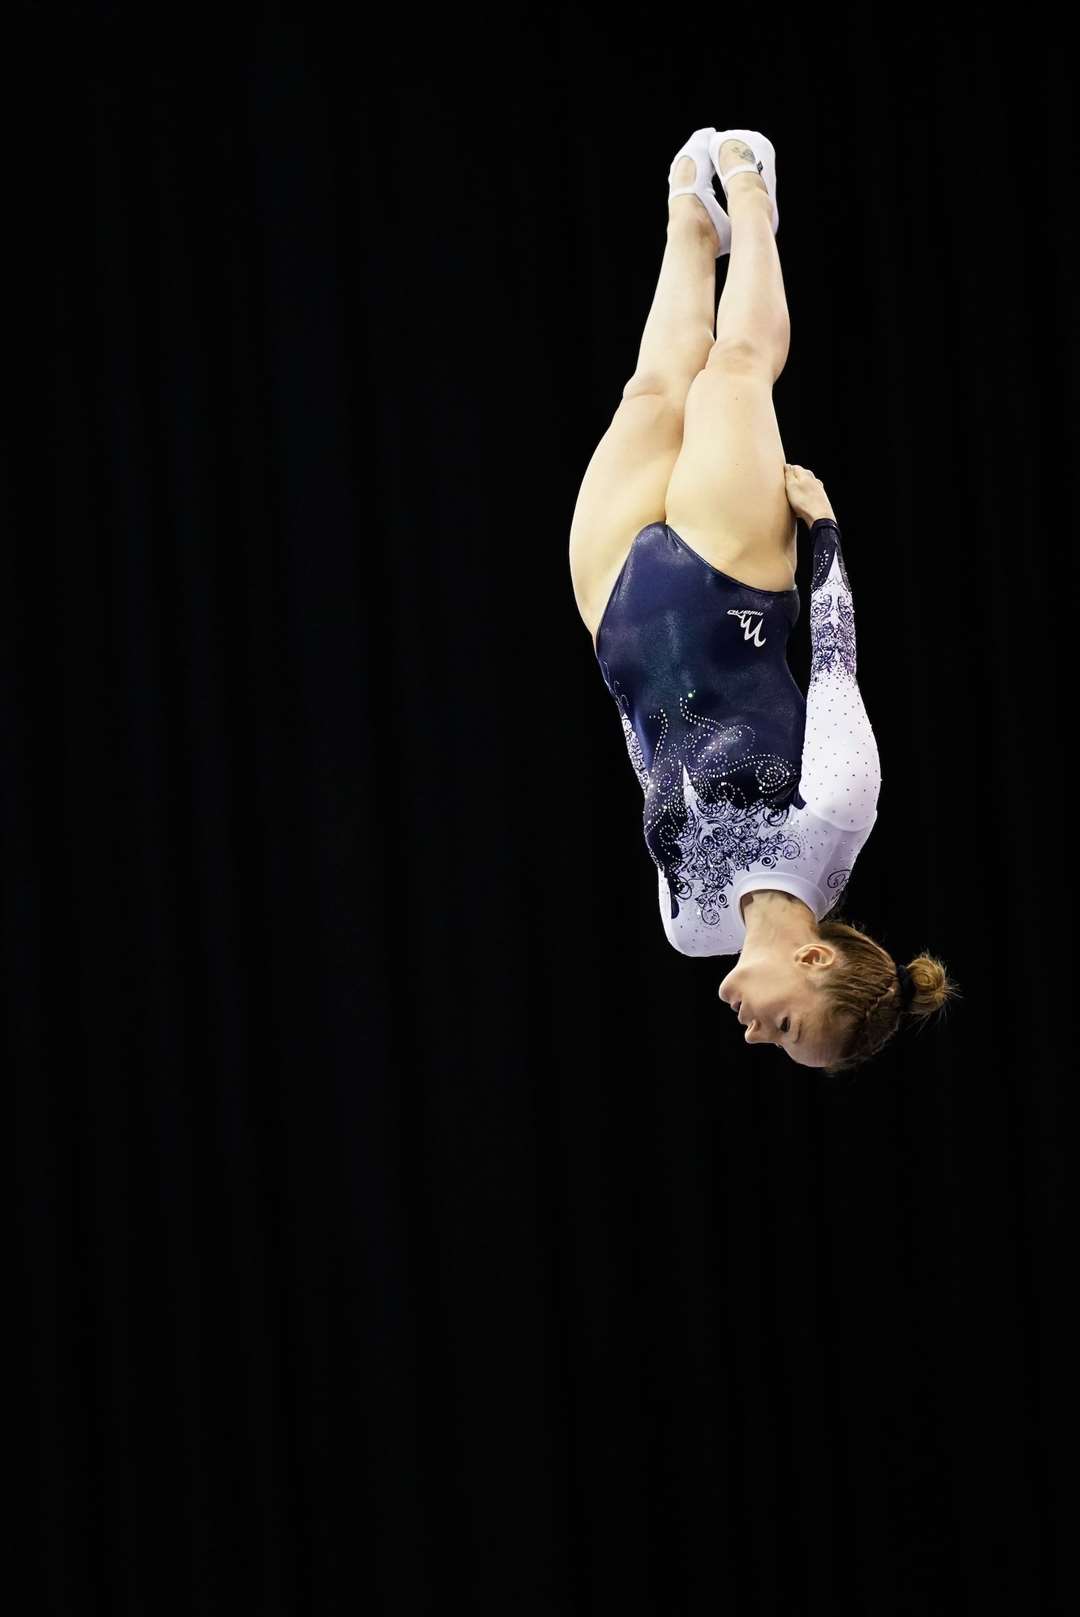 Kat Driscoll performing at the Trampoline Tumbling and DMT Championships 2019 Picture: British Gymnastics/Alan Edwards